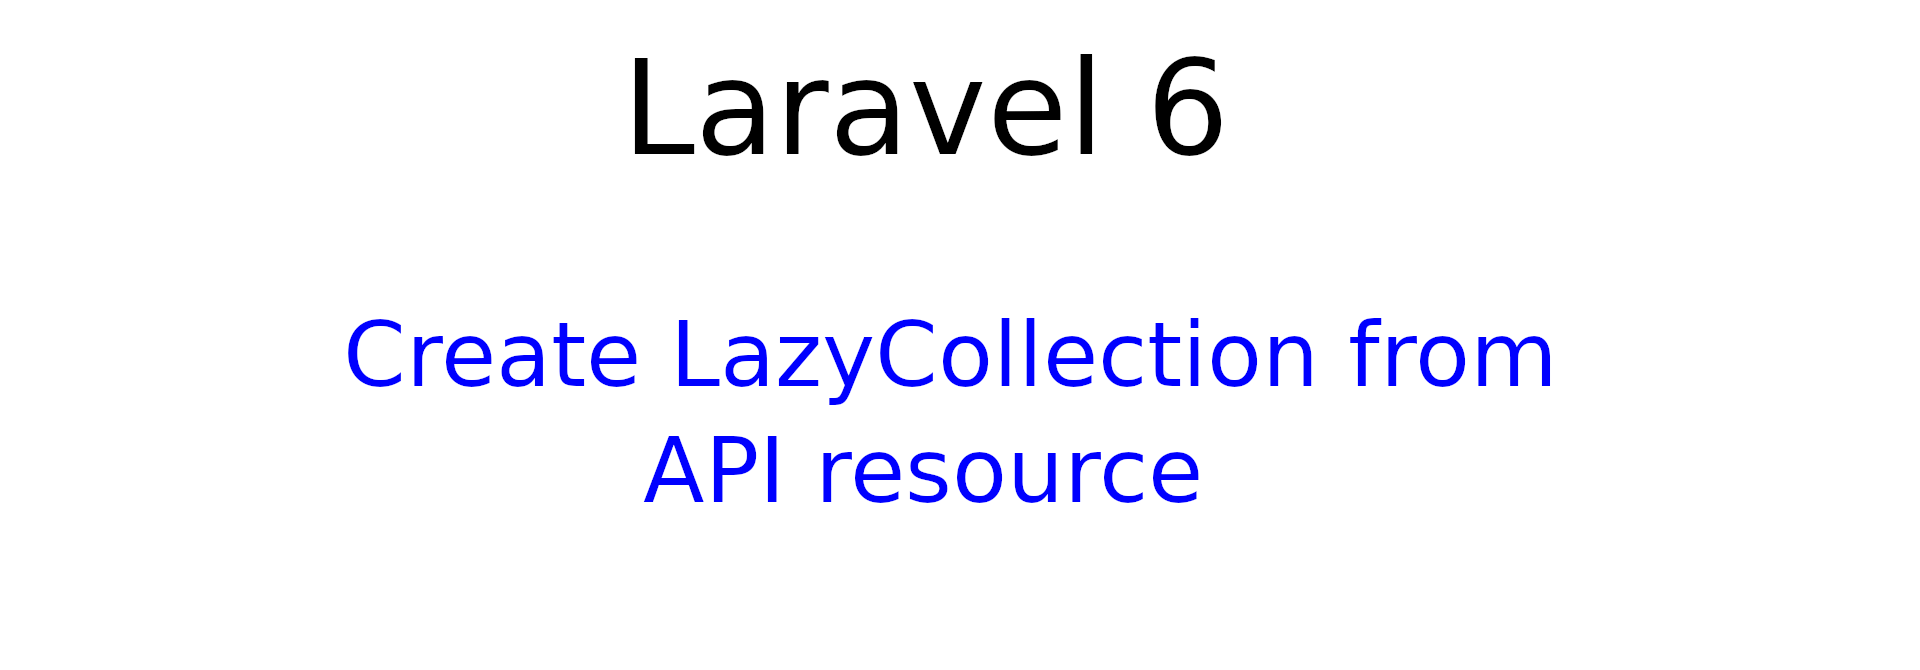 Create LazyCollection from API resource